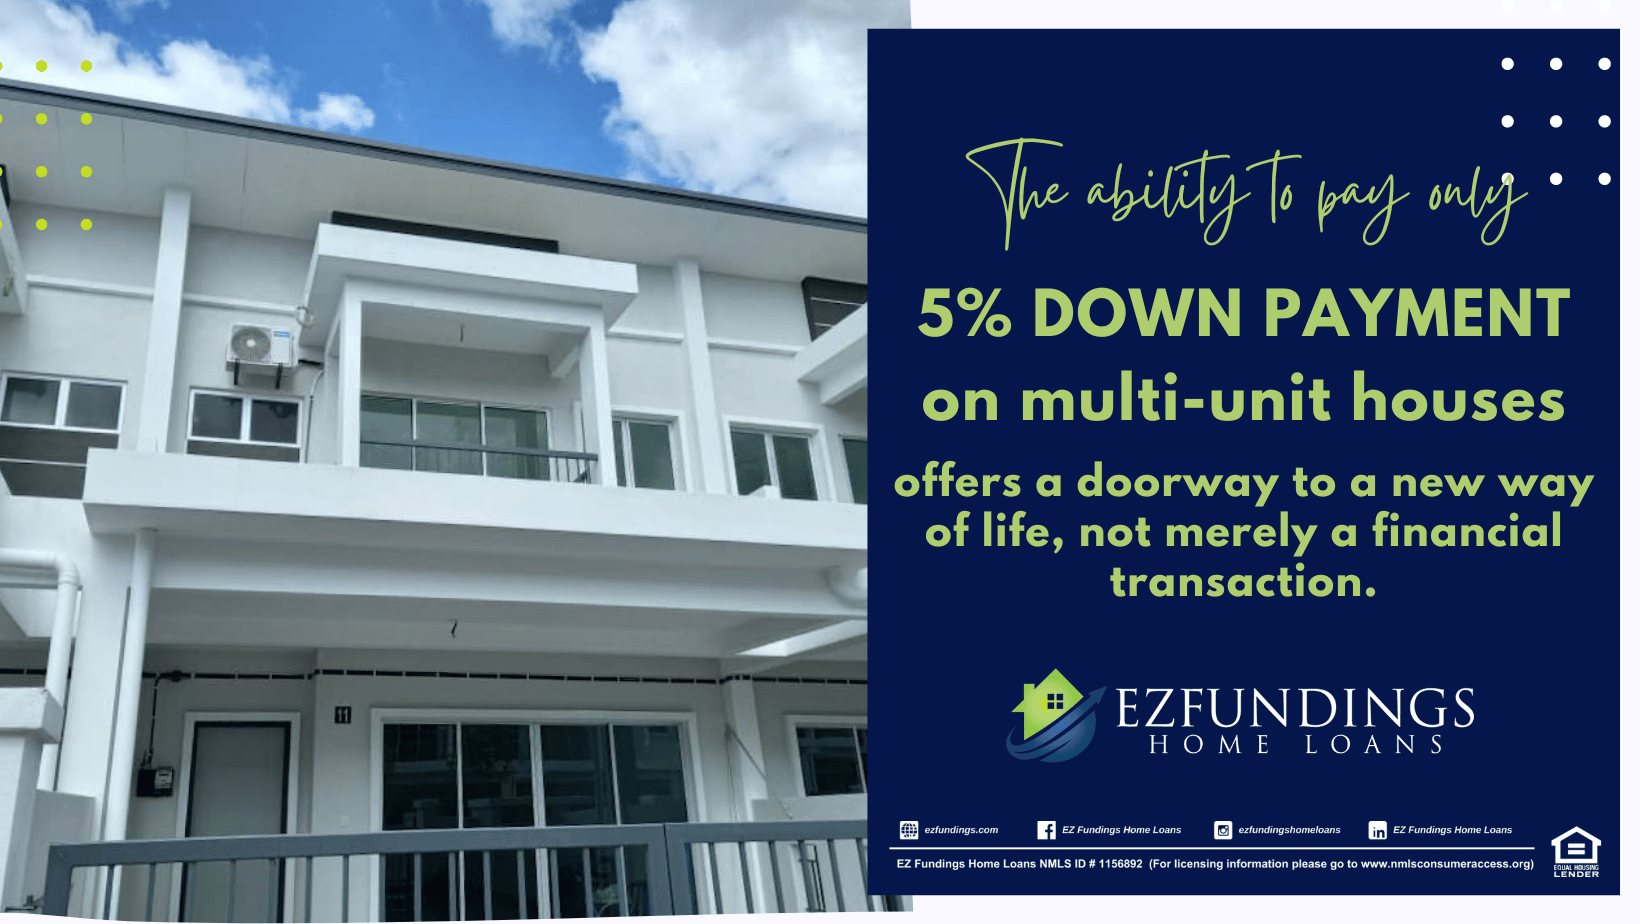 "5% Down Payment on Multi-Unit Properties" background.